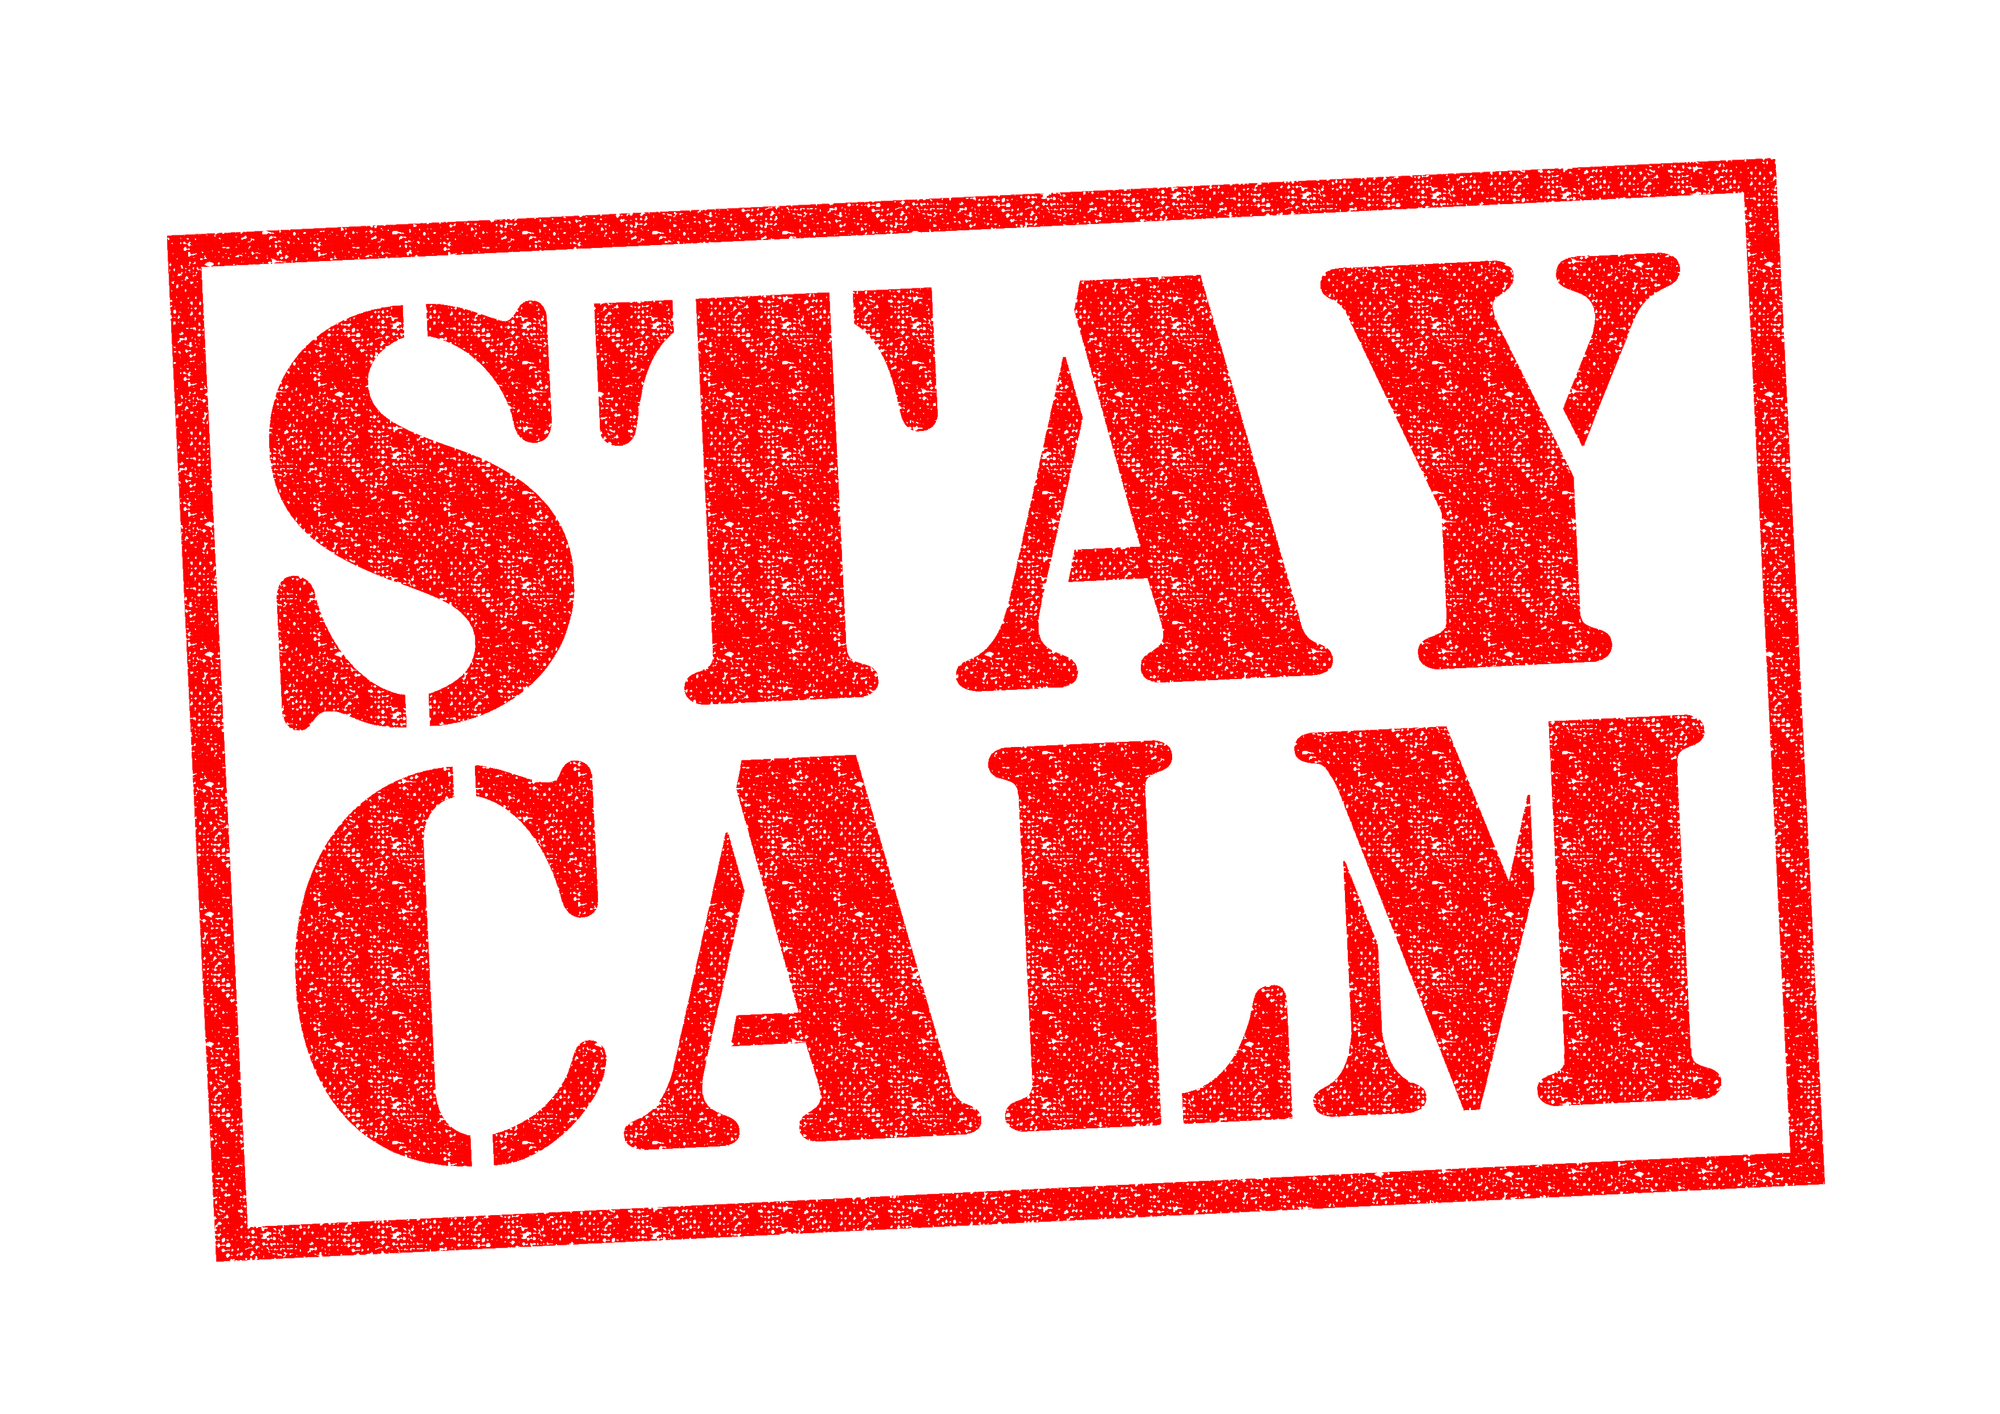 STAY CALM red Rubber Stamp over a white background.